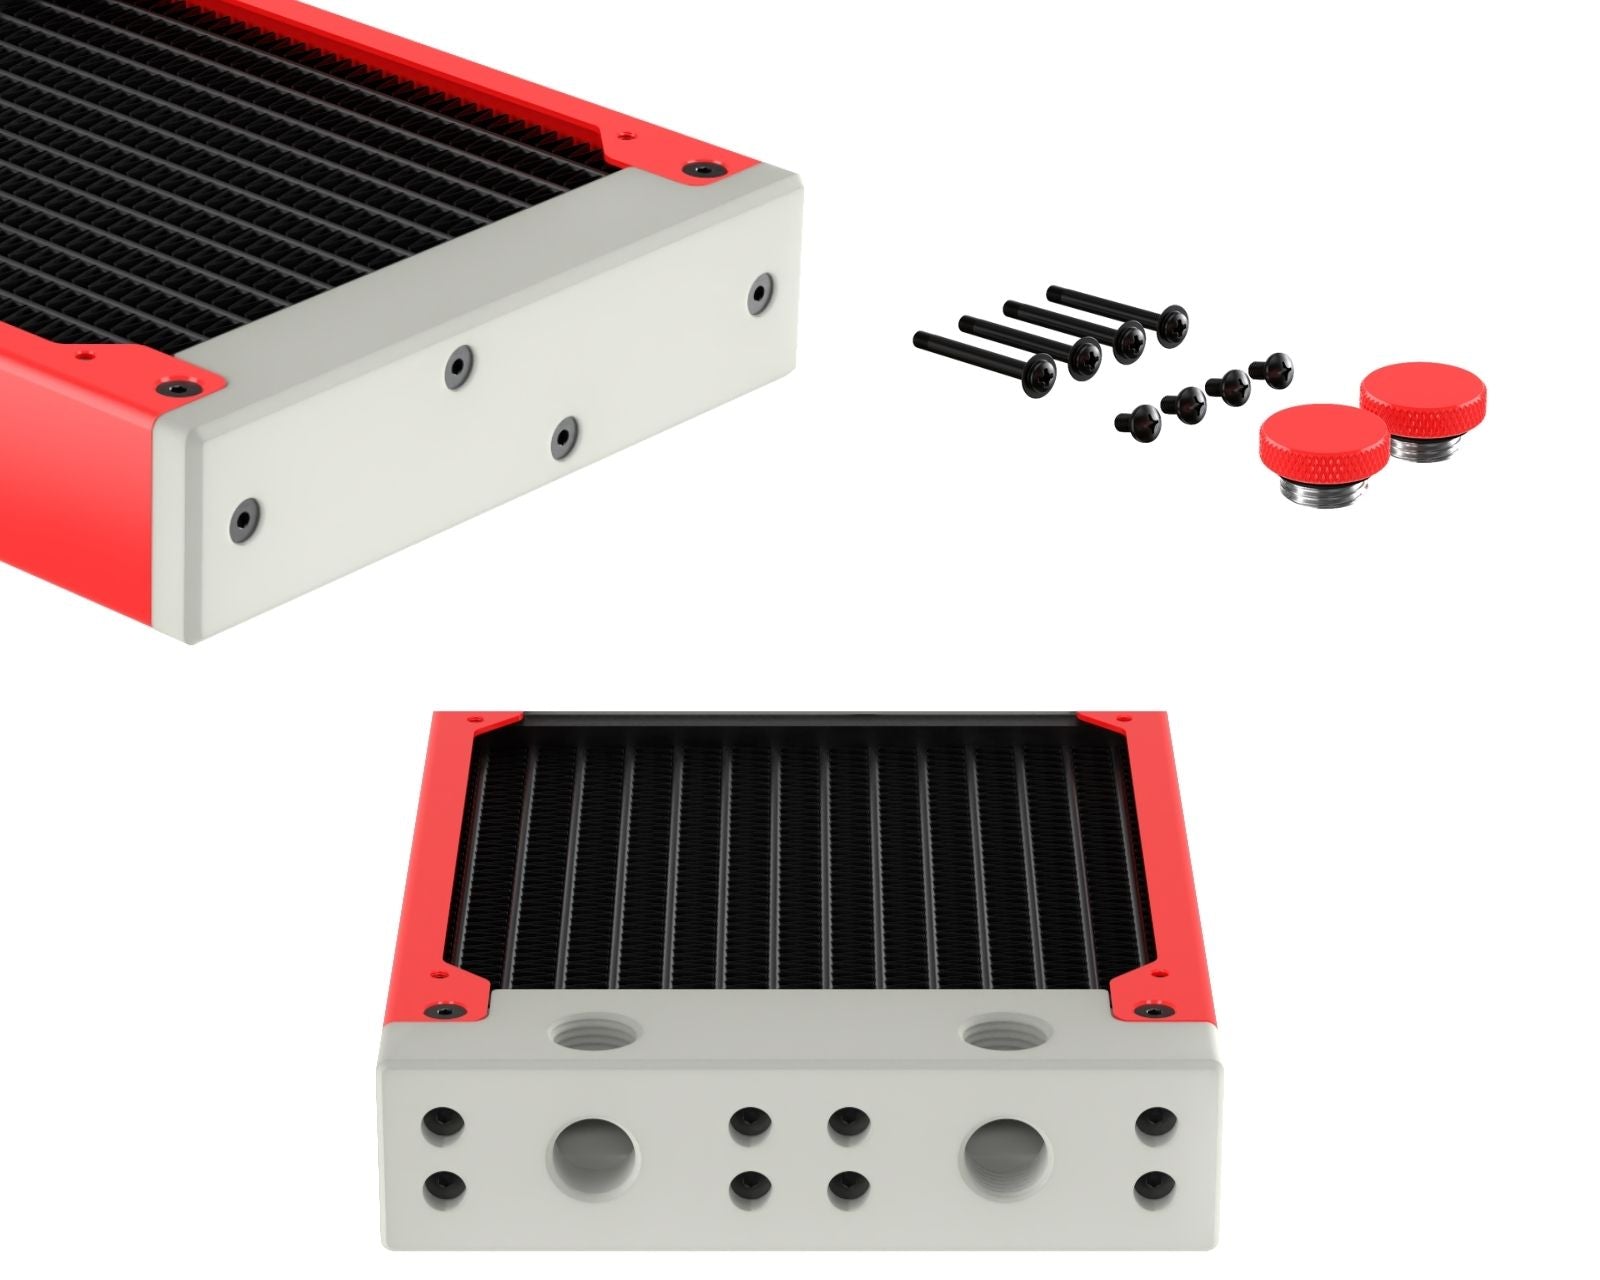 PrimoChill 120SL (30mm) EXIMO Modular Radiator, White POM, 1x120mm, Single Fan (R-SL-W12) Available in 20+ Colors, Assembled in USA and Custom Watercooling Loop Ready - UV Red